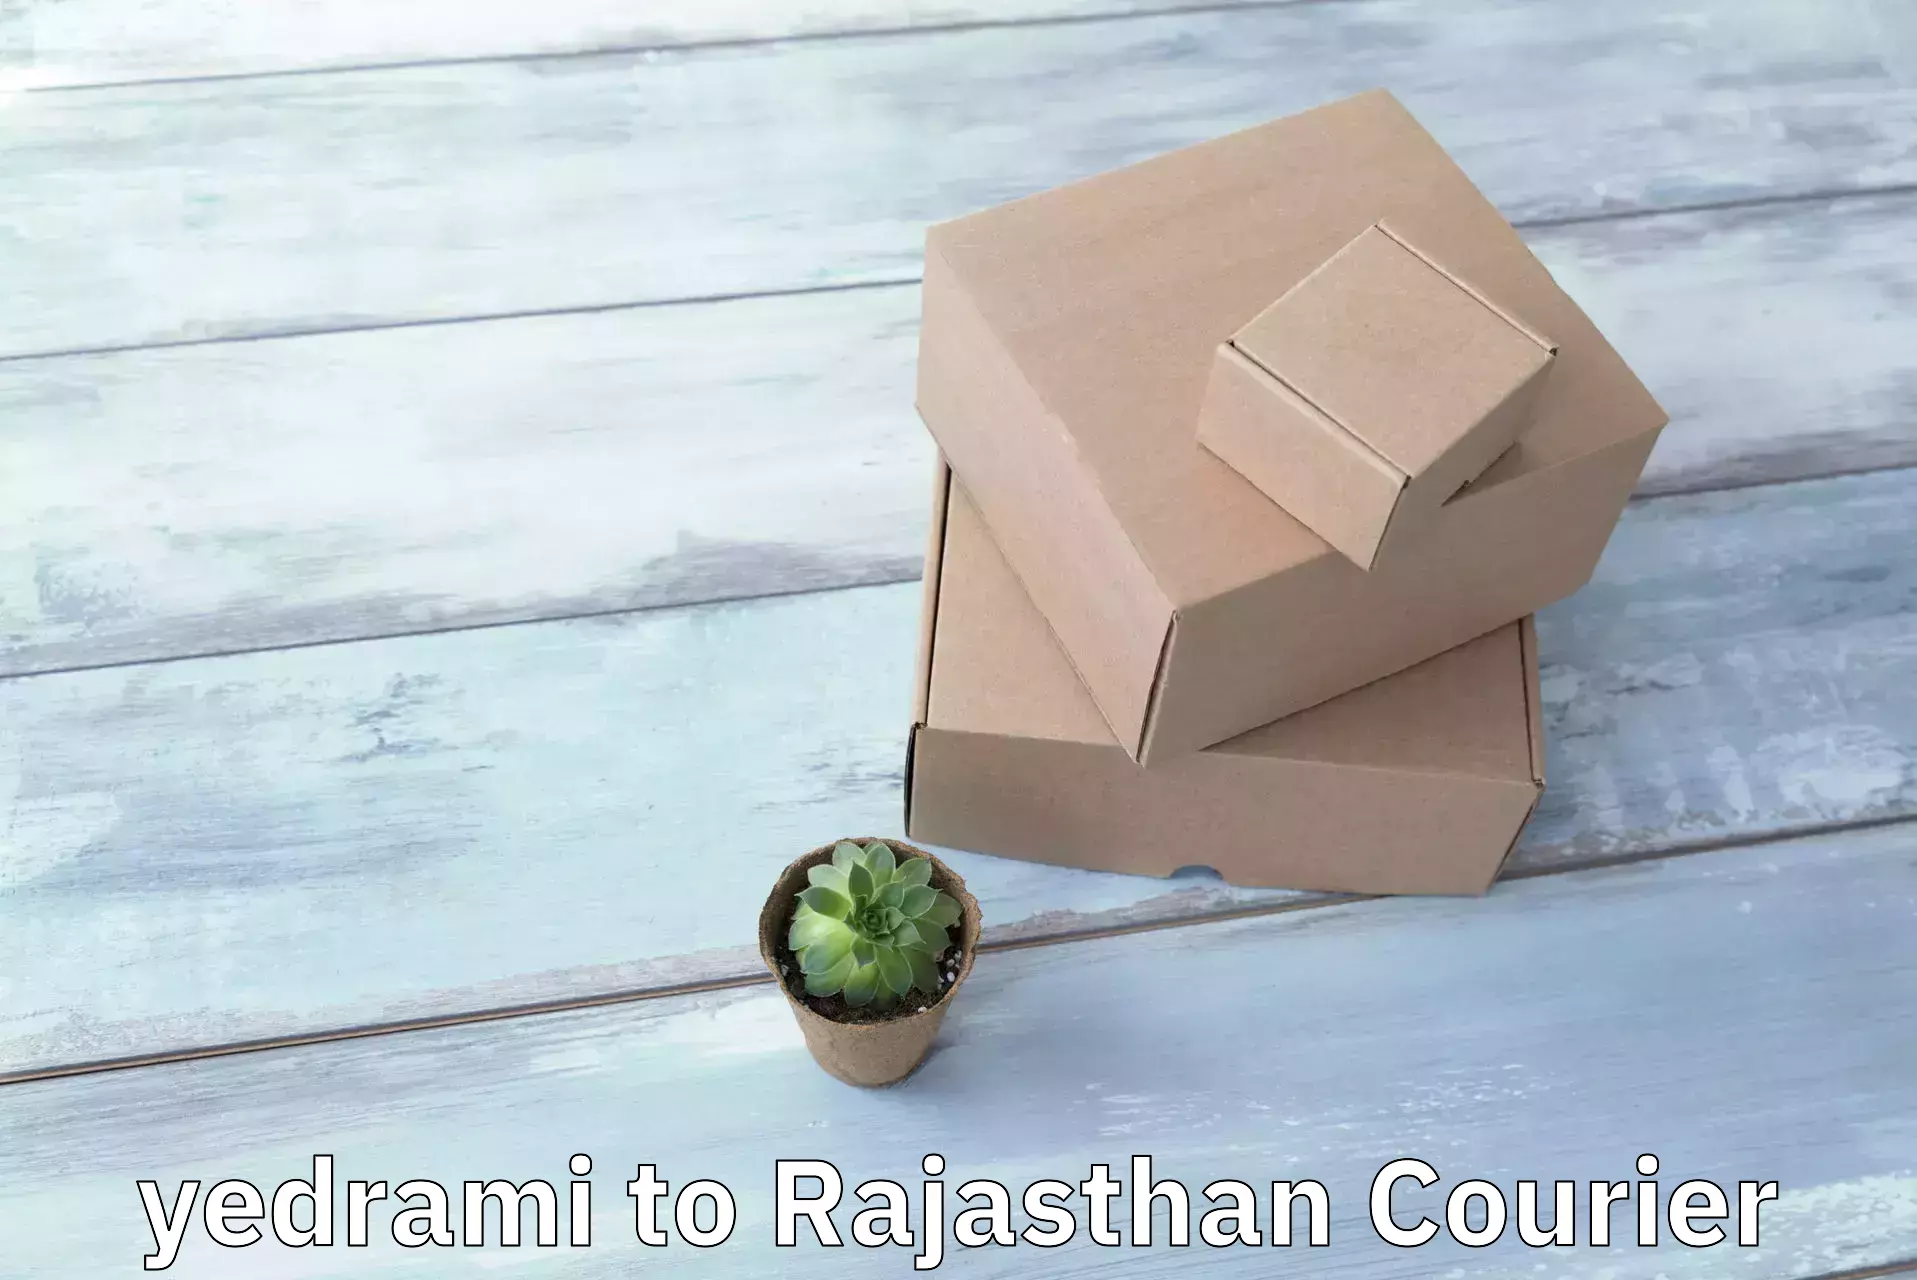 Reliable courier service yedrami to Rajasthan